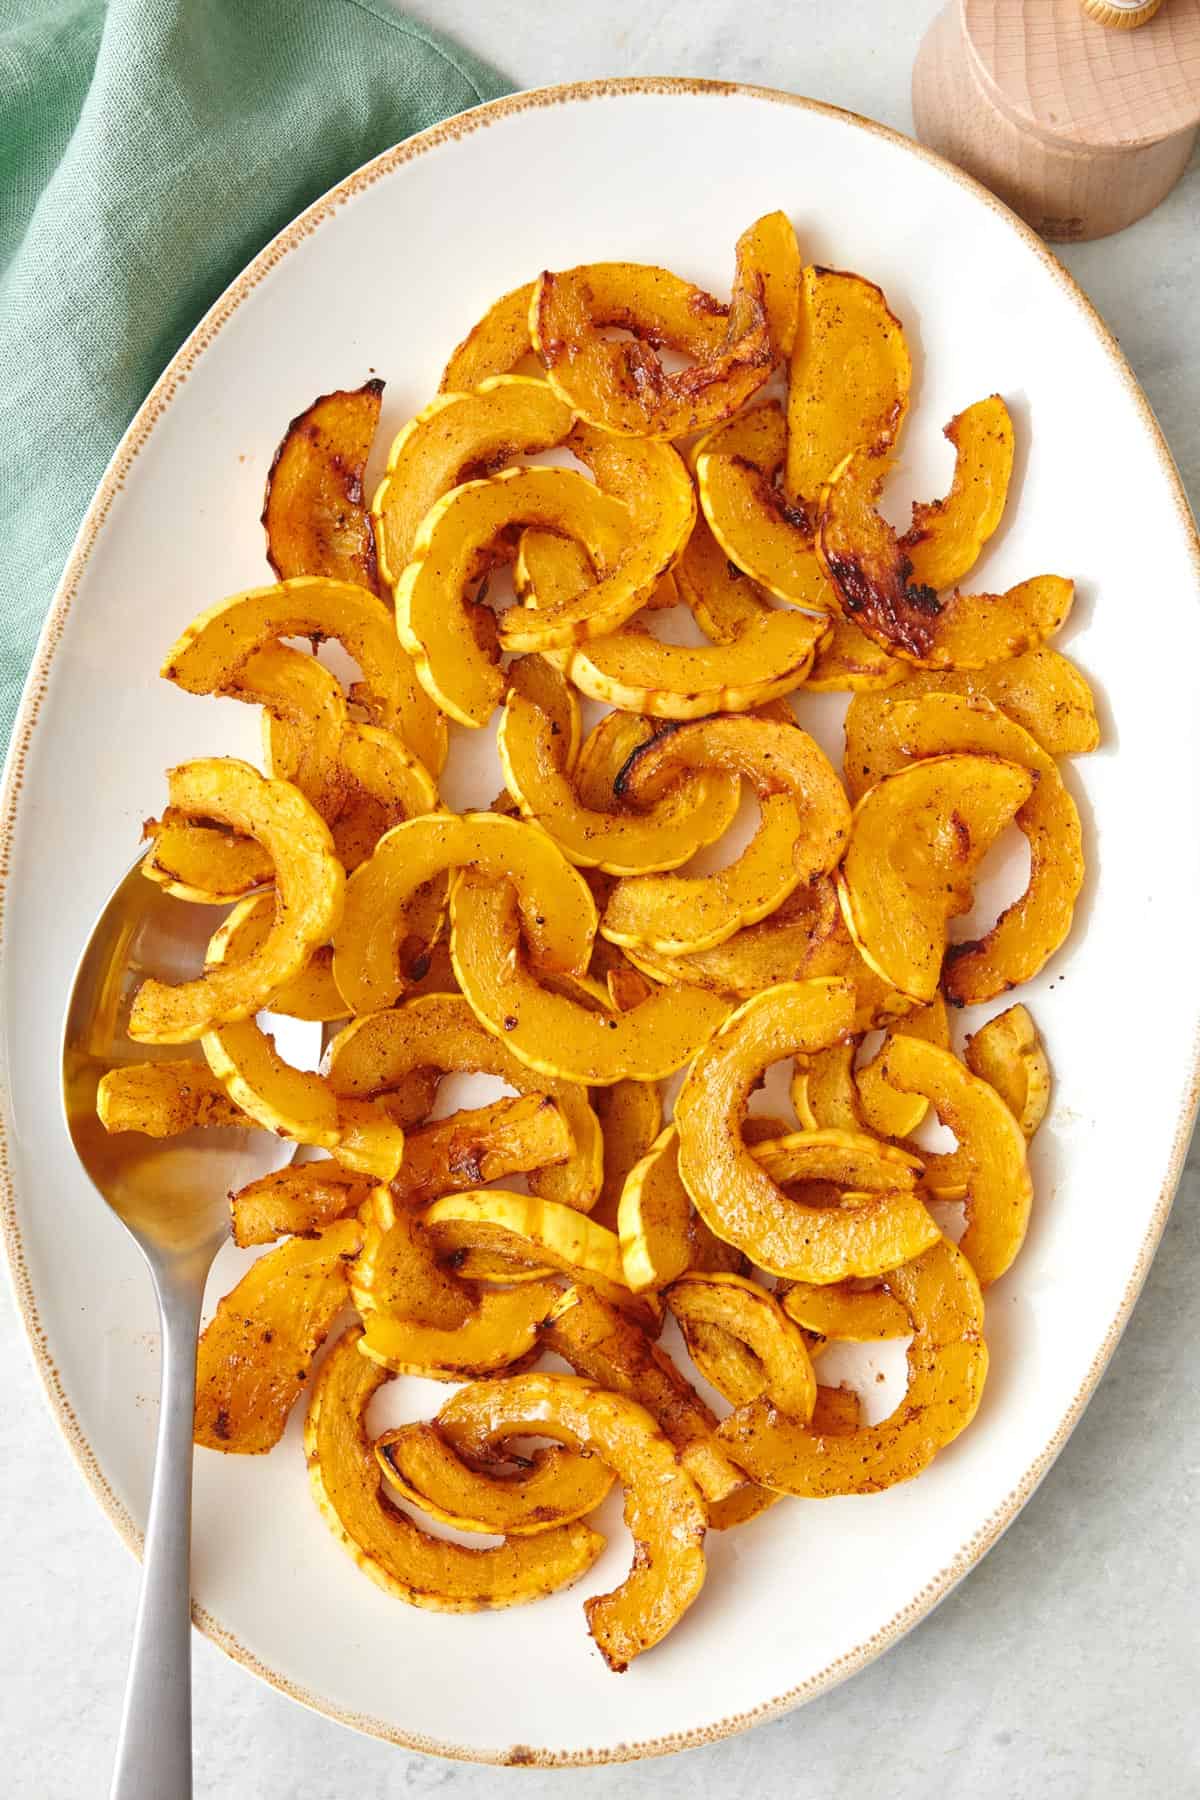 https://feelgoodfoodie.net/wp-content/uploads/2023/04/Roasted-Delicata-Squash-10.jpg